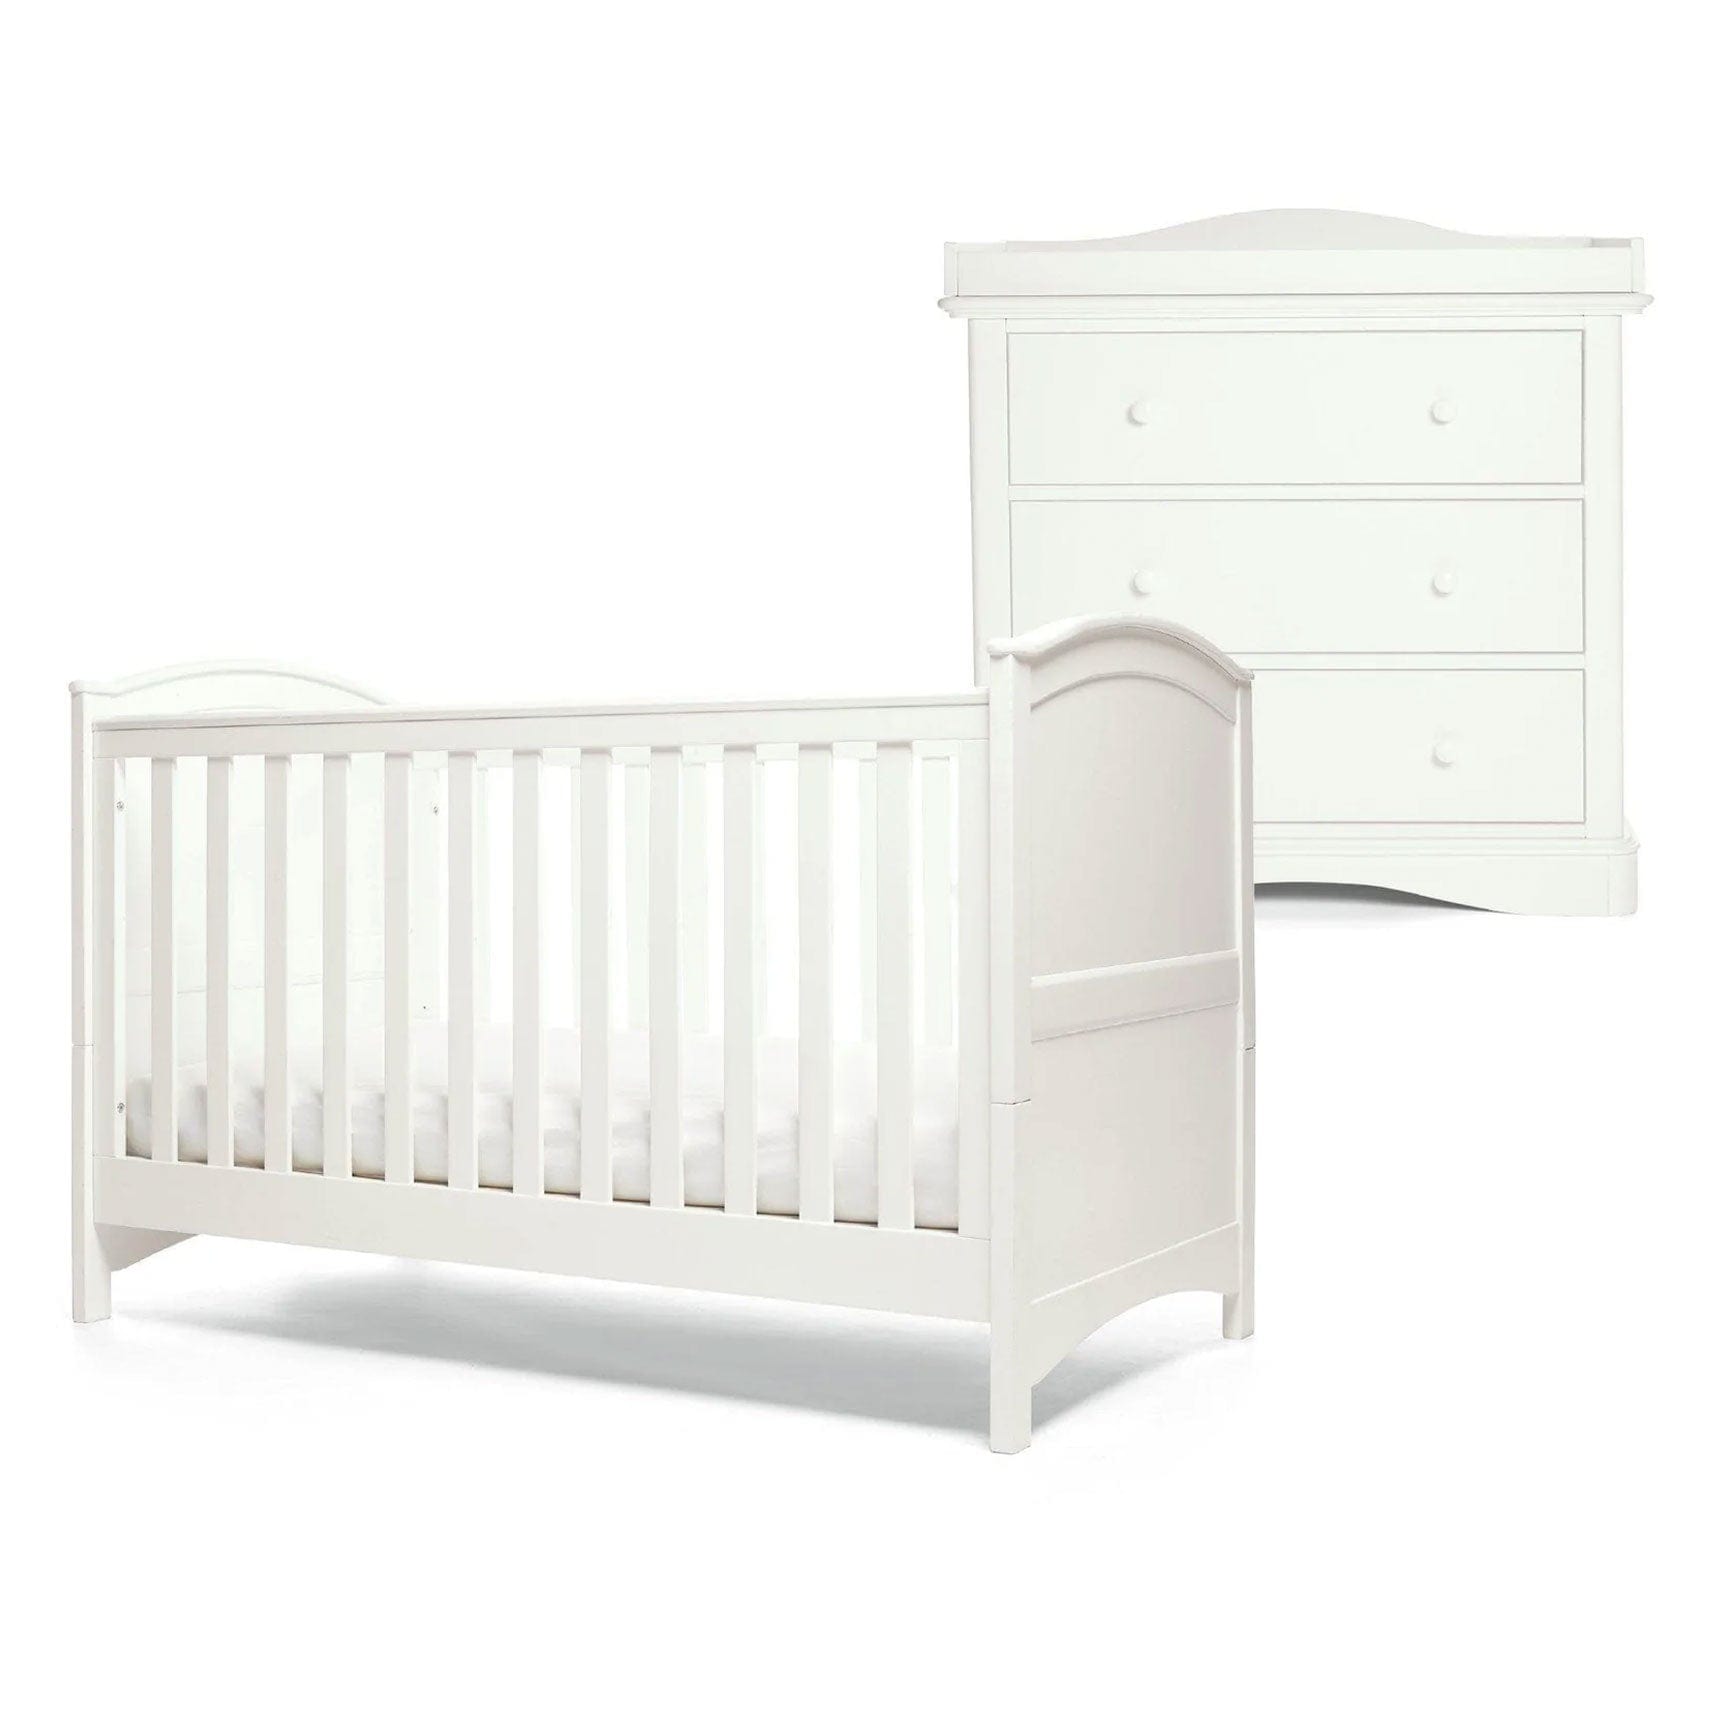 Mamas & Papas Flyn 2 Piece Cotbed and Dresser Changer Set in White Nursery Room Sets